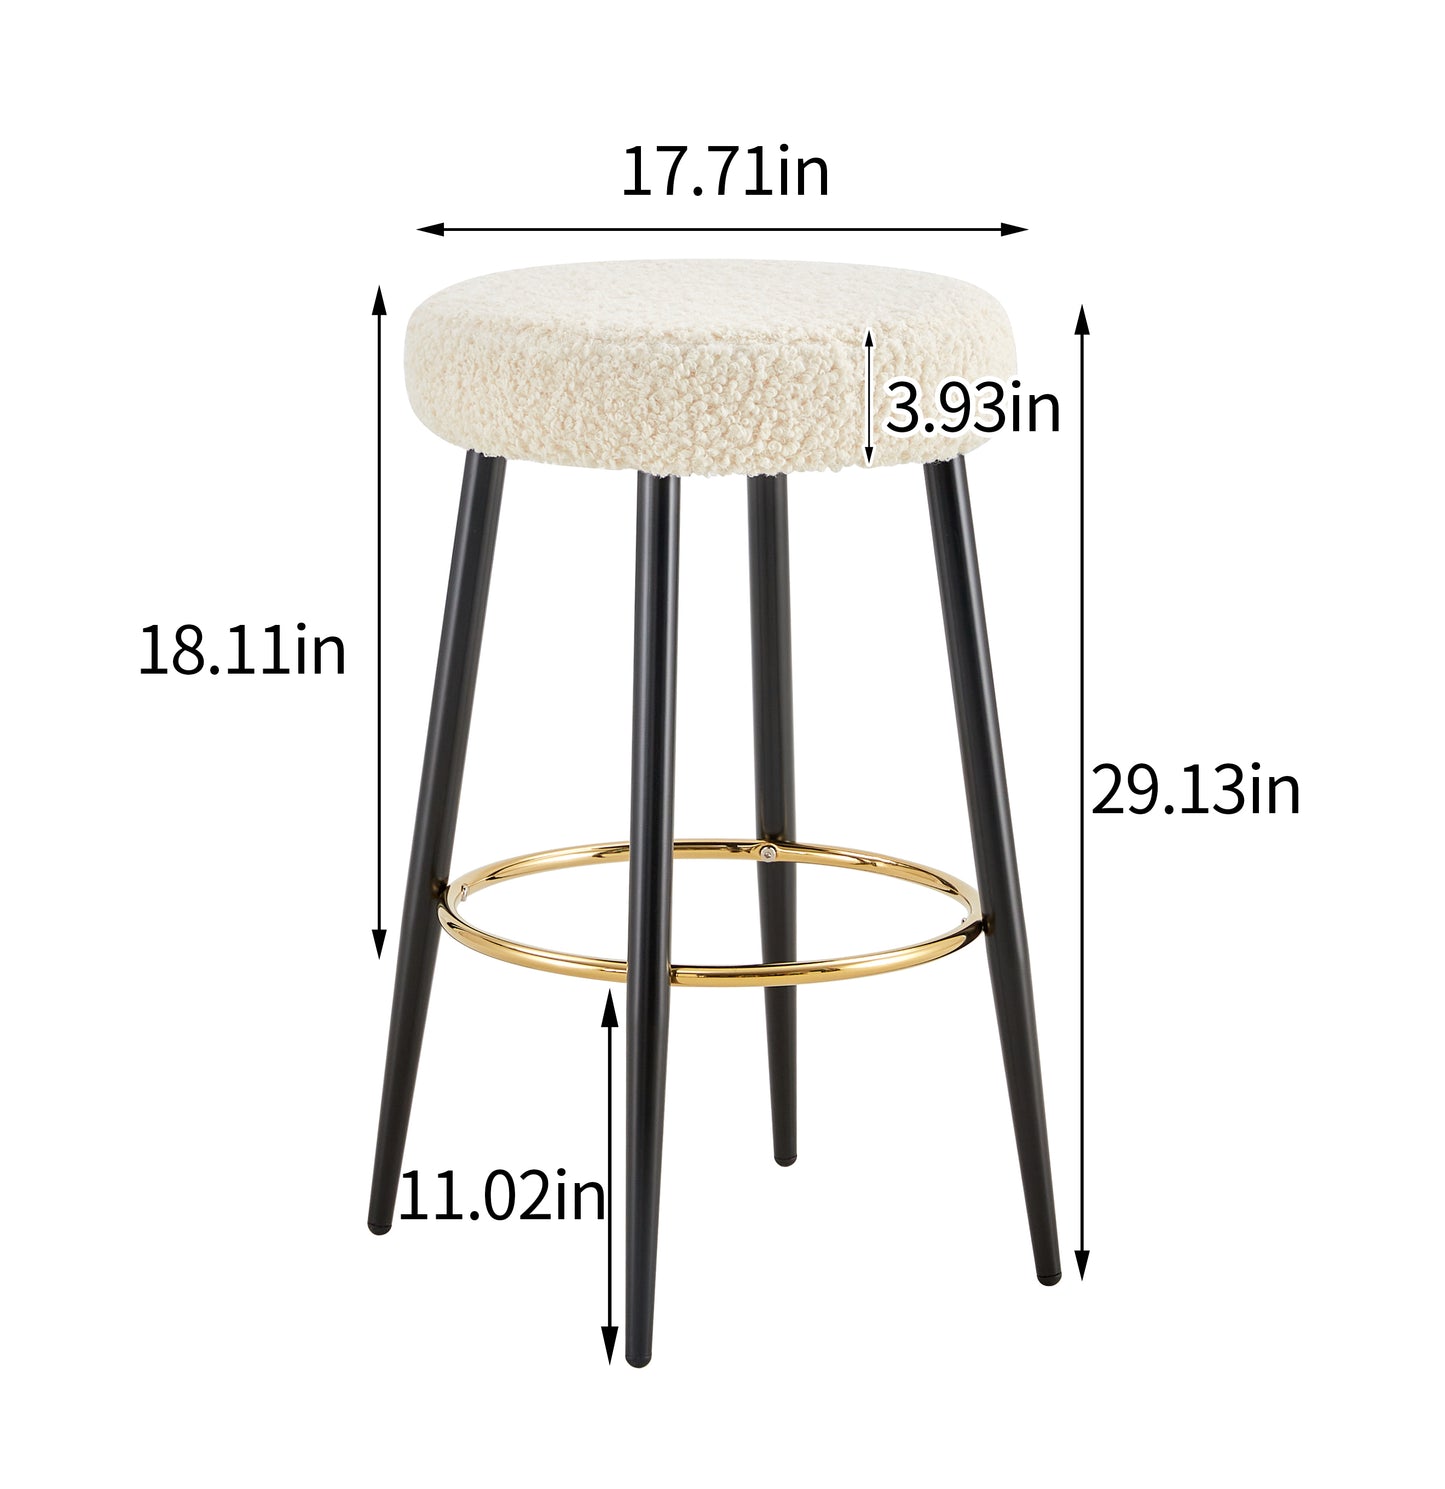 Counter Height Bar Stools Set of 2, PU Kitchen Stools Upholstered Dining Chair Stools 24 Inches Height with Golden Footrest for Kitchen Island Coffee Shop Bar Home Balcony berber Fleece